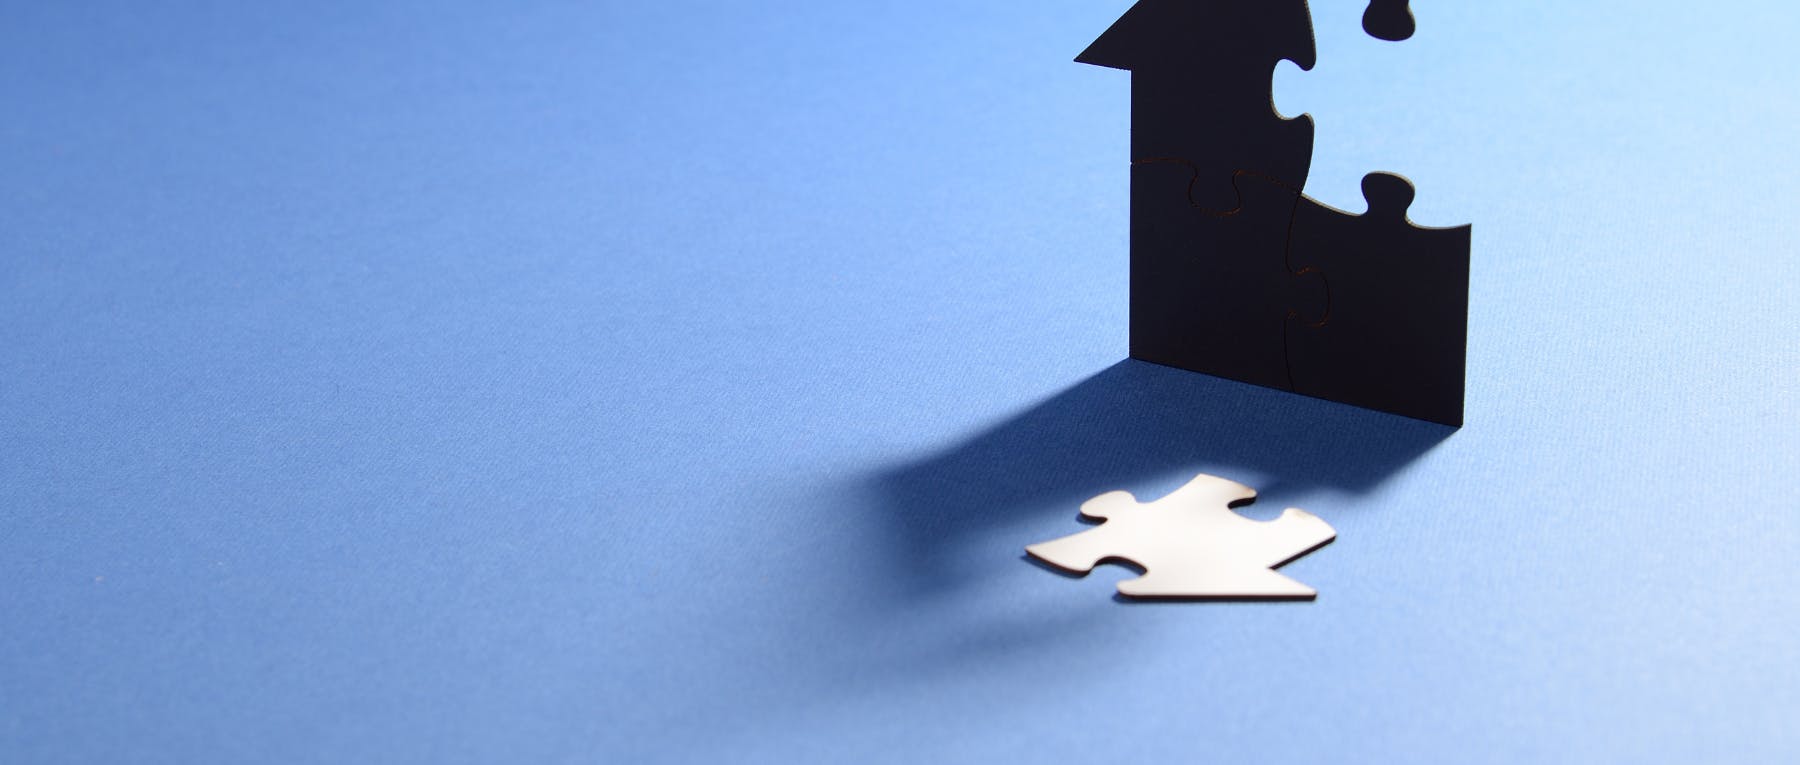 house with a puzzle piece cut out that is laying on a blue background